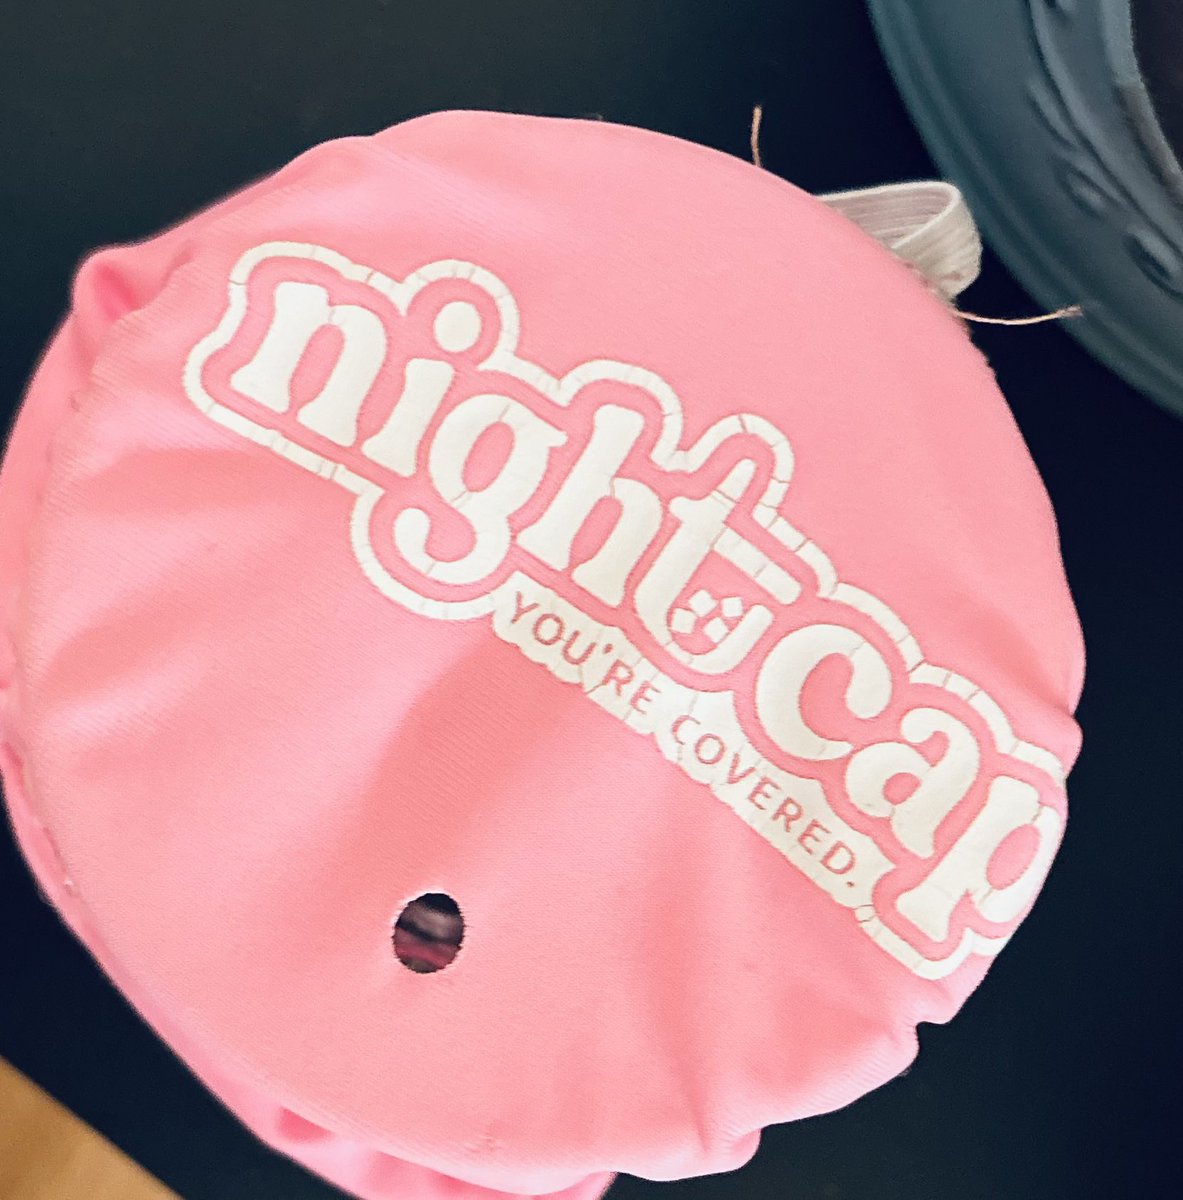 #LifeOnTikTok #TikTokPartner #TikTokMadeMeBuyIt Check out the nightcap #drinkcover to #help #project your #drinks when out #barhopping or #clubbing! Code: NIGHTCAP10-ZFHDCC nightcapit.kckb.st/17994972#night… #nightcappartner #preventdrinkspiking #fyp #foryourpage #foryou #longweekend #may